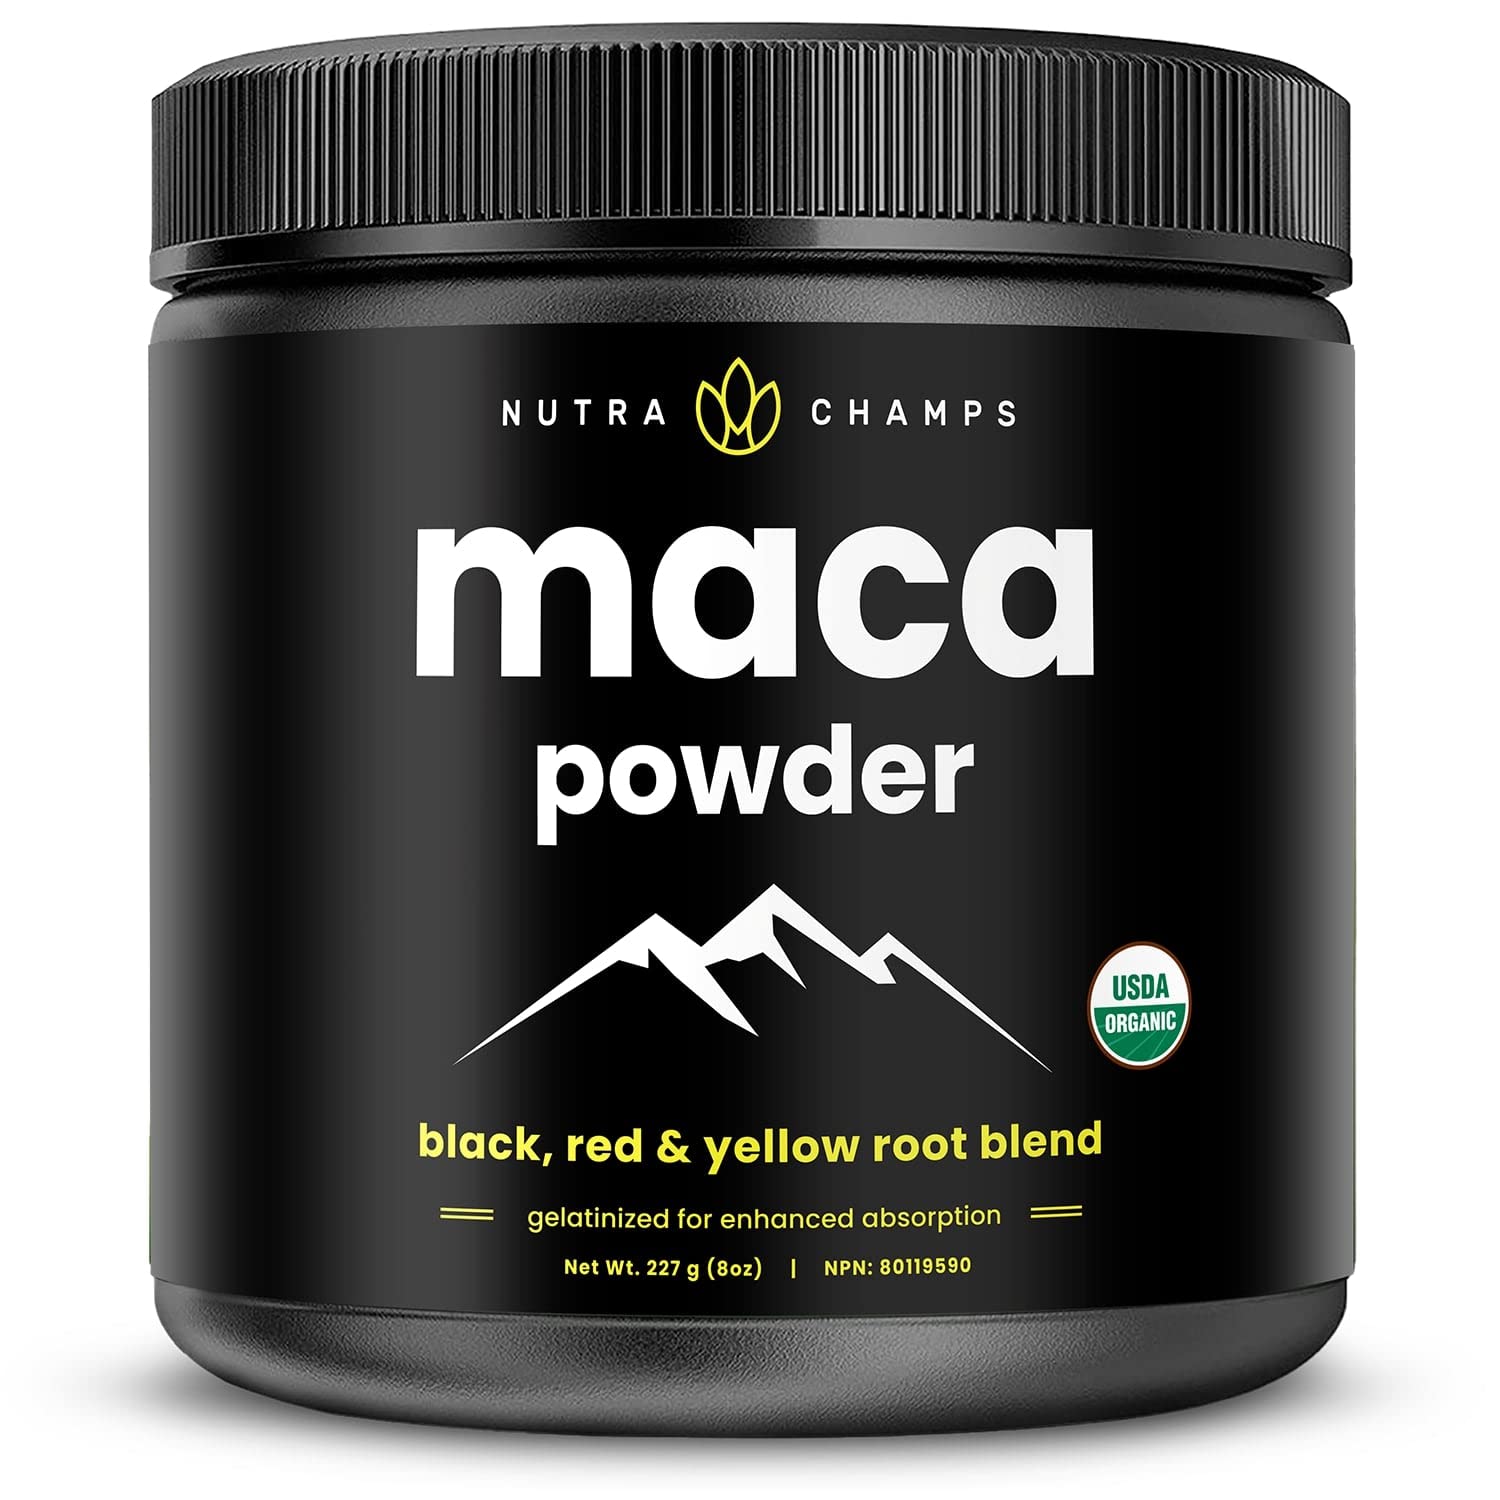 Book Cover Organic Maca Powder - Peruvian Grown Maca Blend with Yellow, Black & Red Roots - Gelatinized for Superior Bioavailability - Natural, Vegan Non-GMO 8oz. Bag